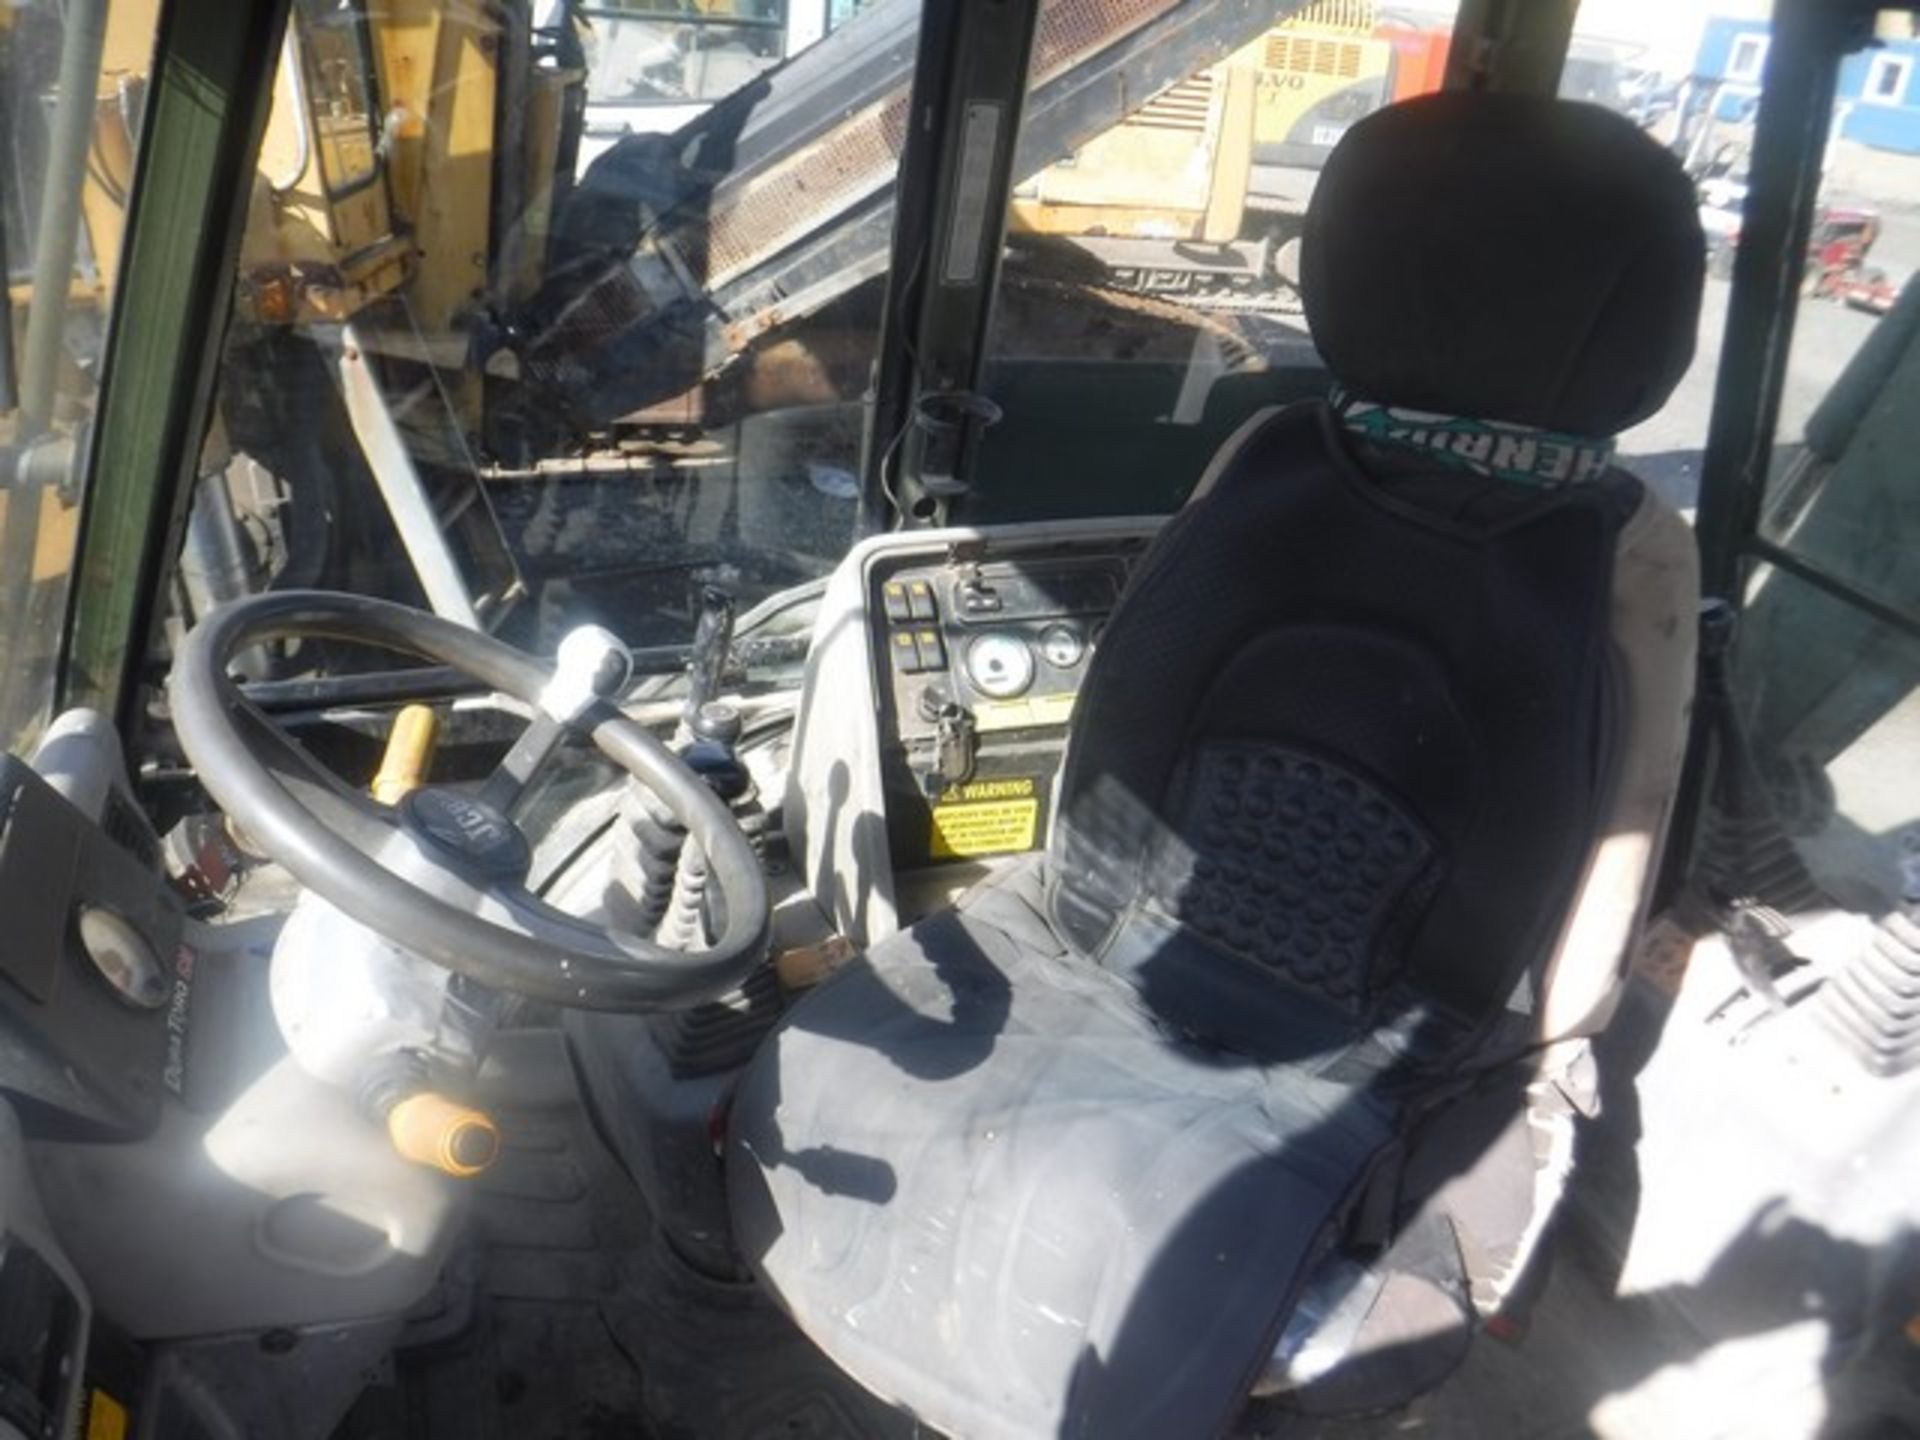 JCB 4C EXCAVATOR 2003, BACKHOE IN FIXED POSITION, HOURS UNKNOWN SN - 0927610 - Image 7 of 7